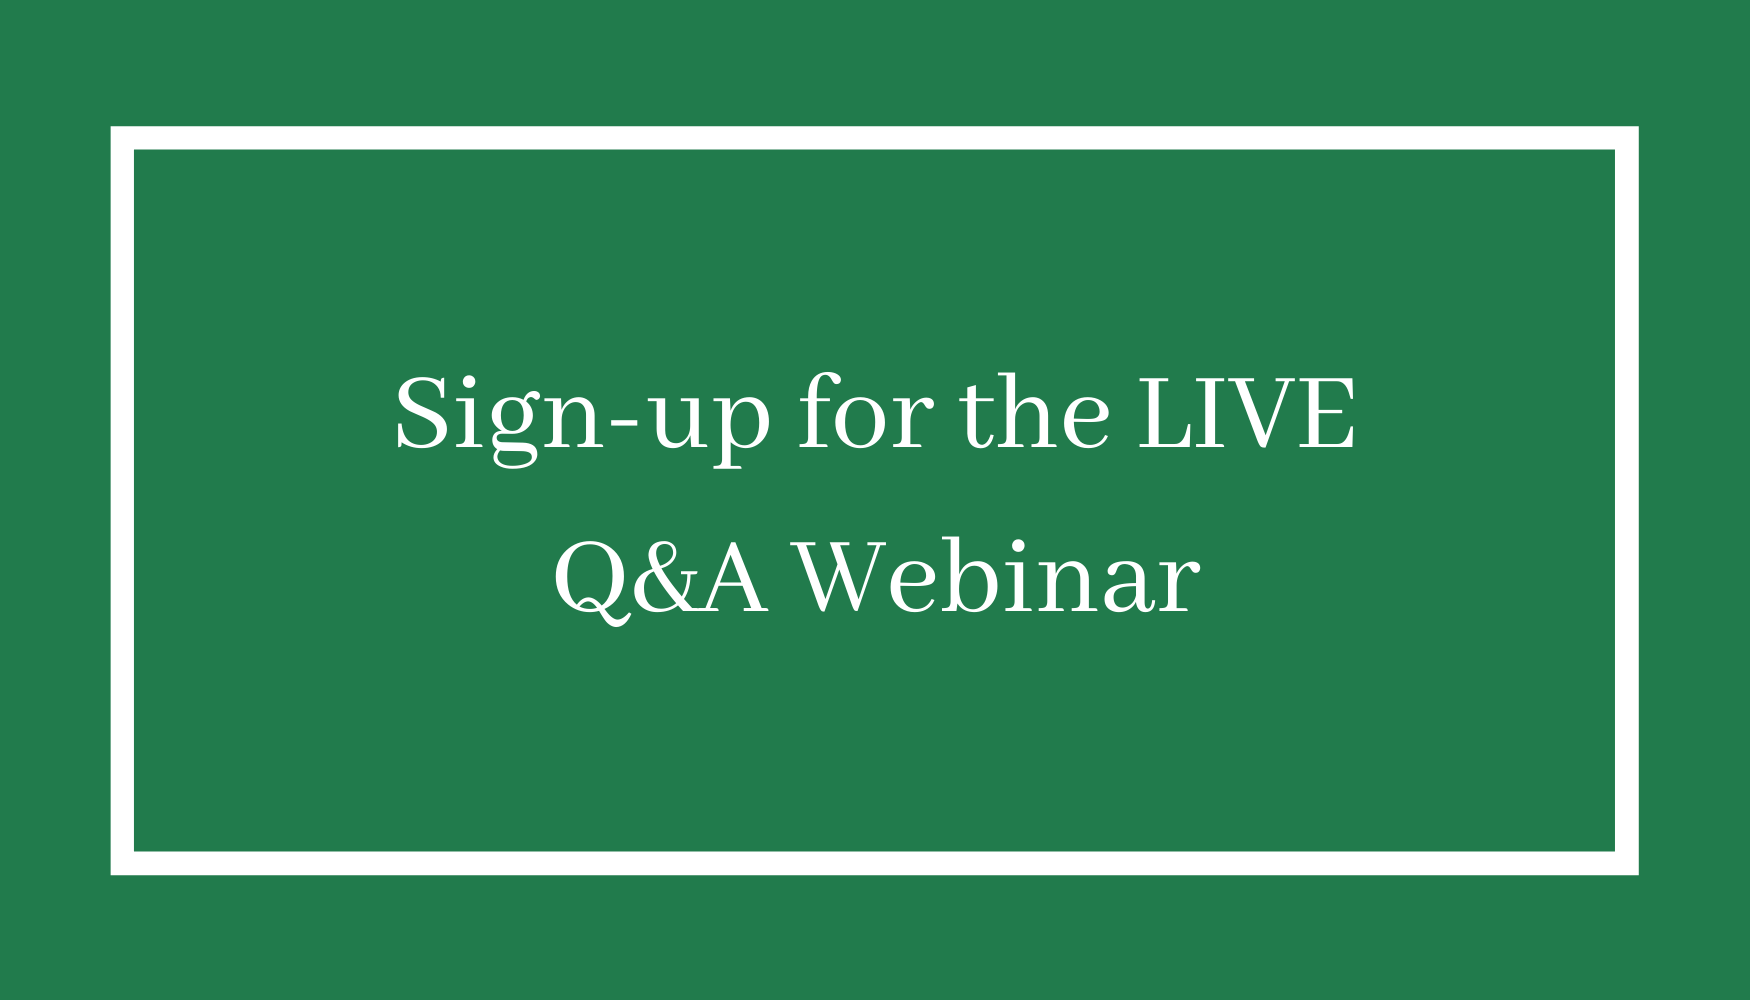 Sign-up for the LIVE Q&A Webinar 